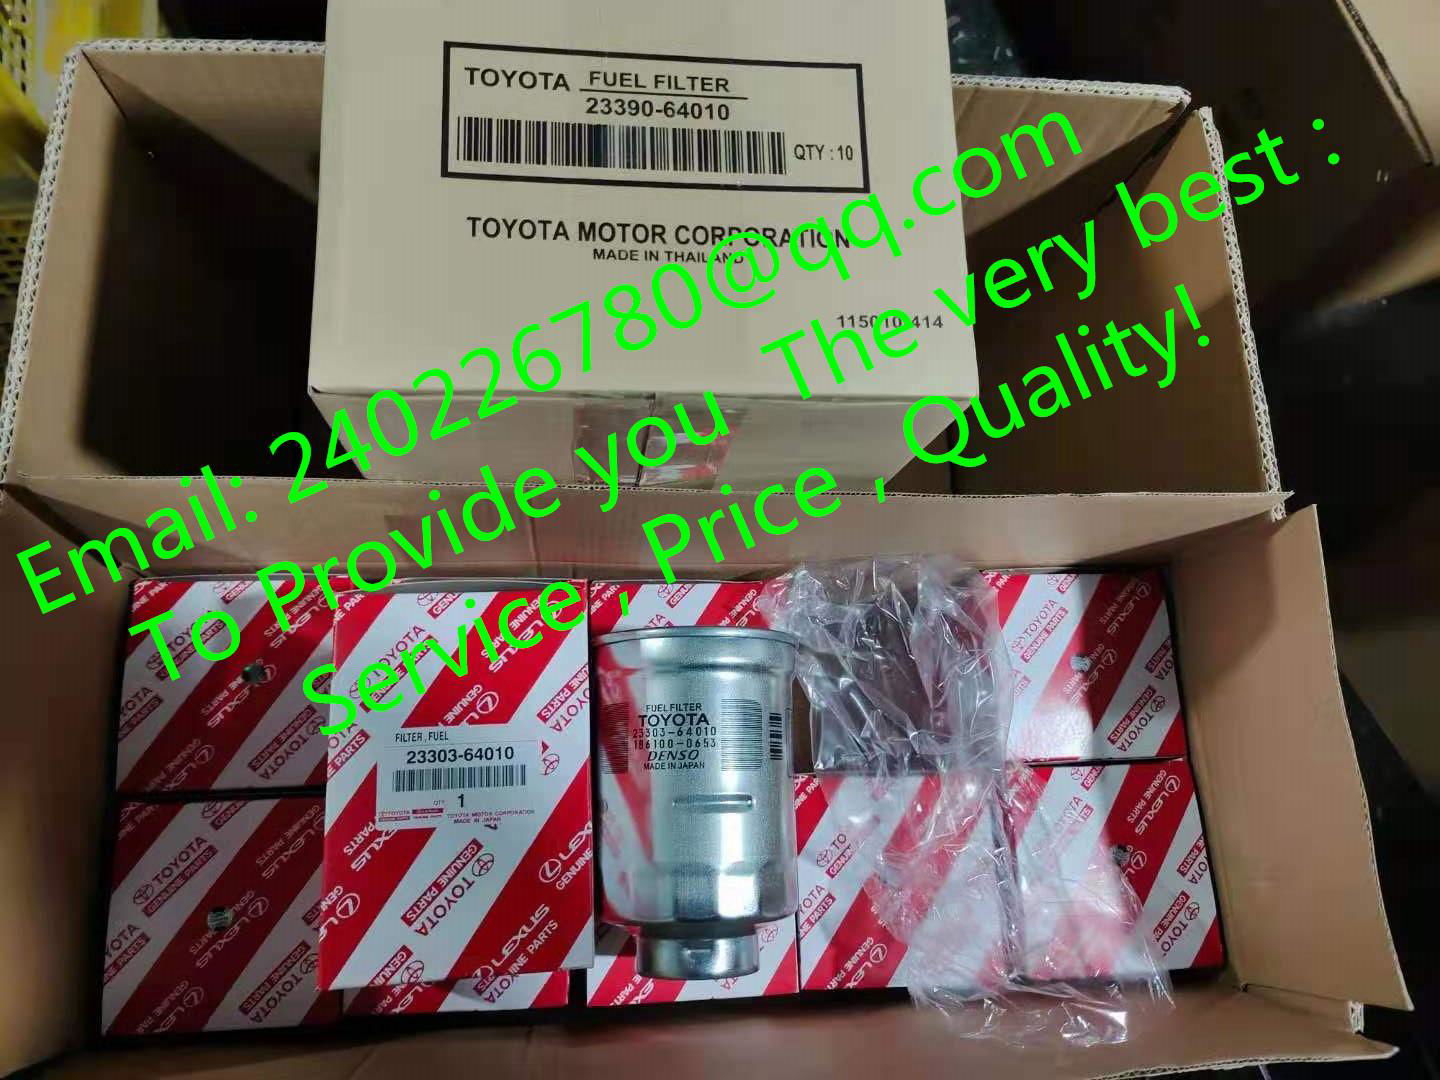 FOR TOYOTA Hilux  Fuel Filter 23303-64010  2330364010 23303-64020  23390-64010   3